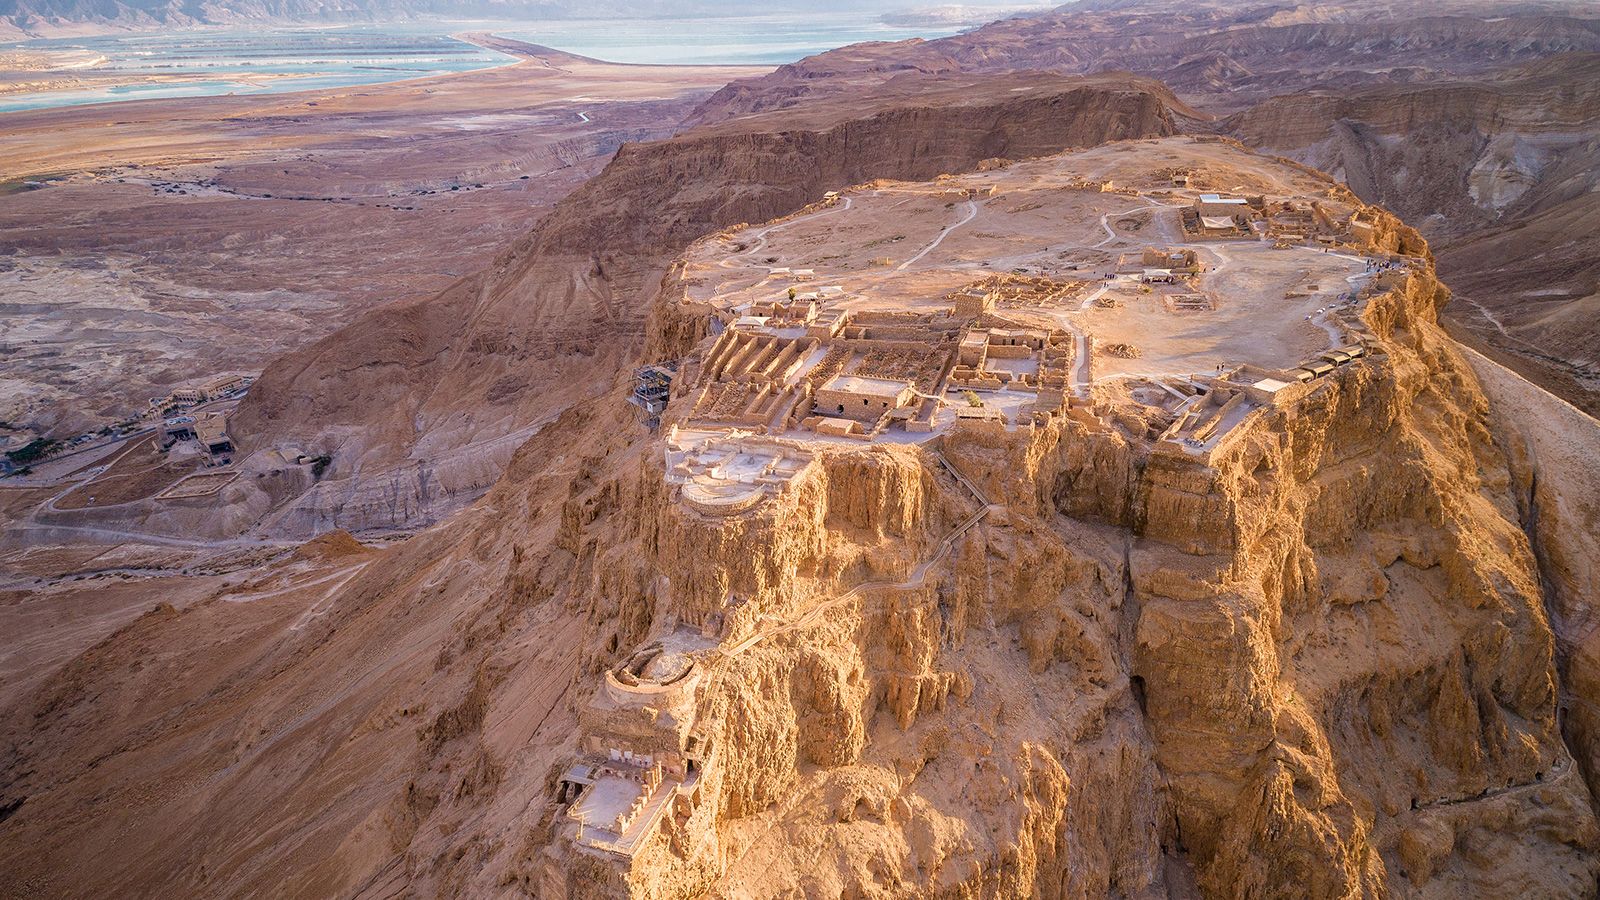 <strong>Israel: </strong>The fortress of Masada, which overlooks the Dead Sea, is one of many fascinating sites in Israel.